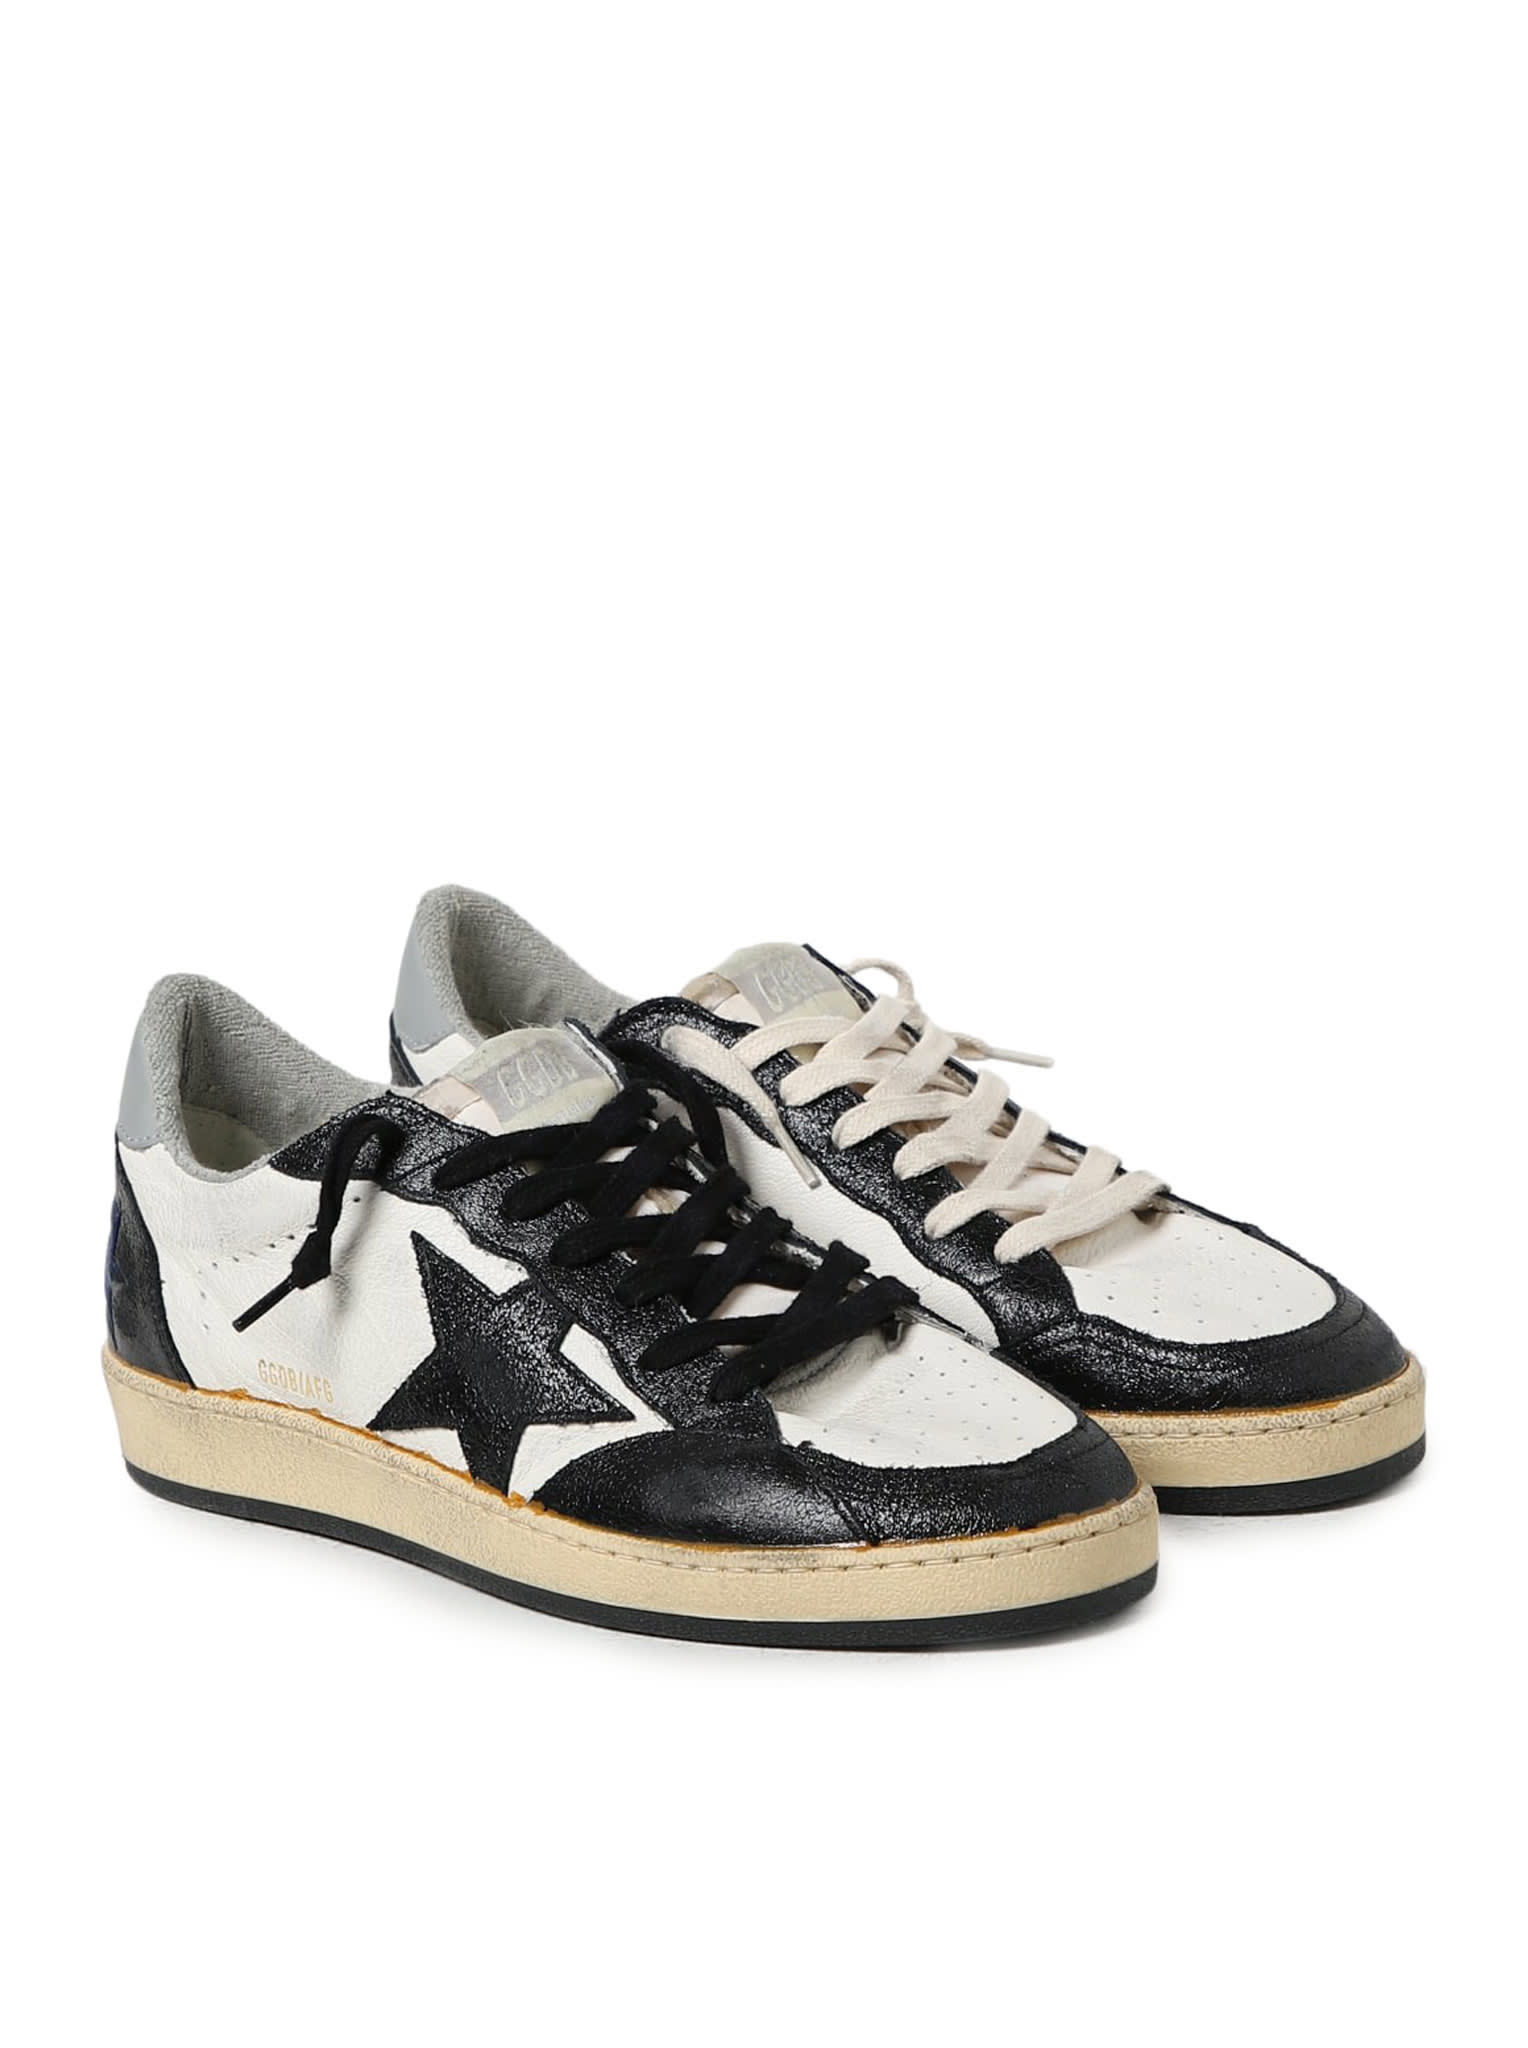 Shop Golden Goose Ballstar Nappa Upper Leather Toe Star And Spur Nylon Tongue In White Black Grey